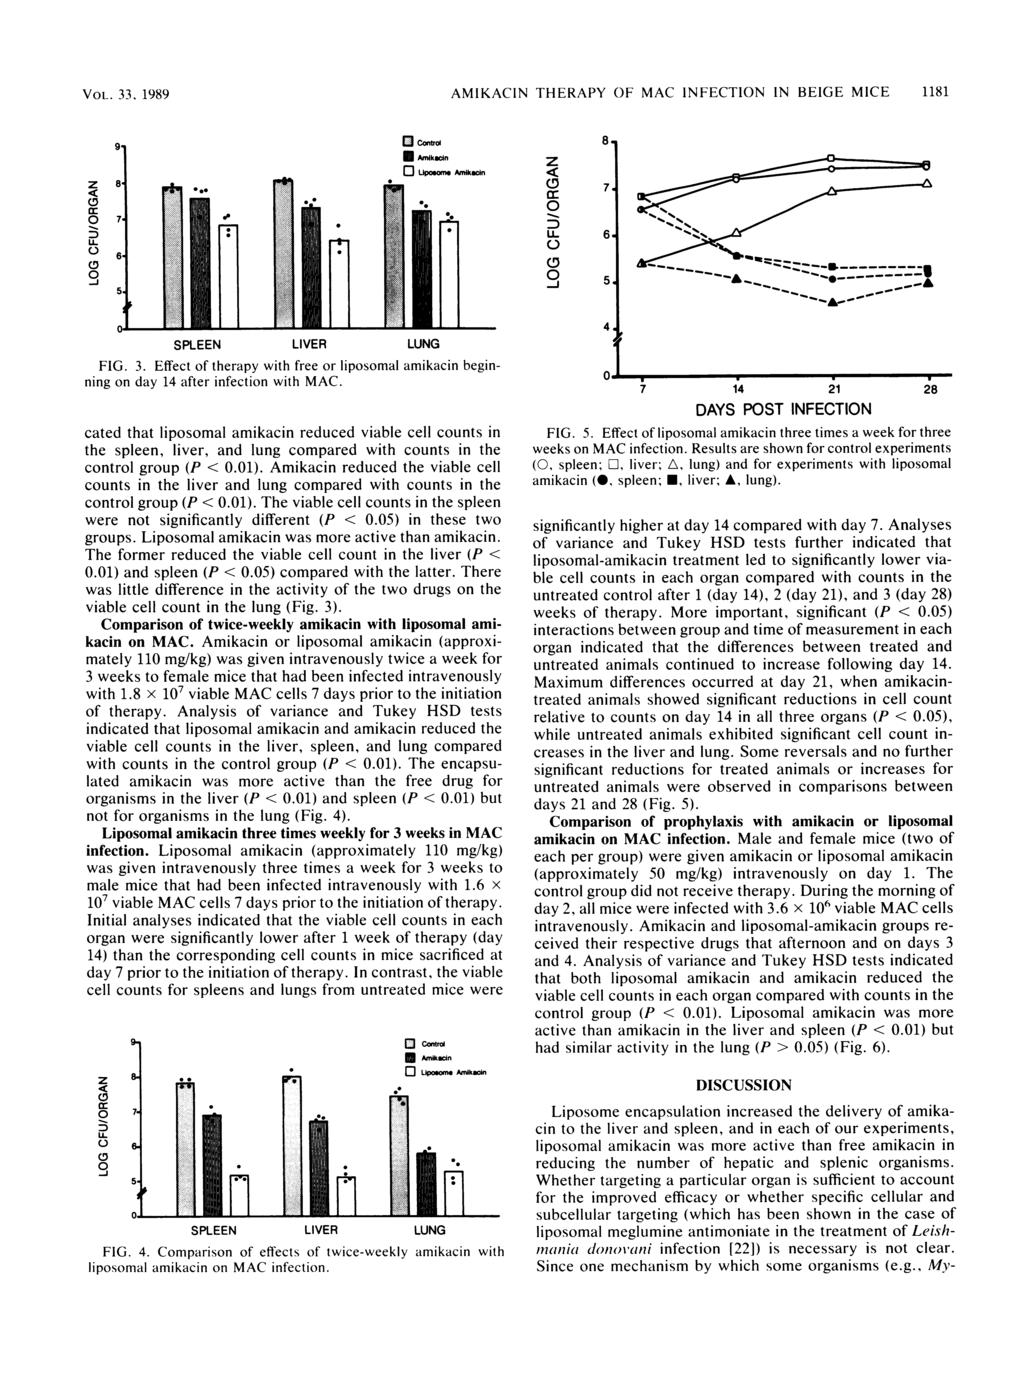 VOL. 33, 1989 AMIKACIN THERAPY OF MAC INFECTION IN BEIGE MICE 1181 Z 8 z cc U- CD -J 7. 6. SPLEEN LIVER LUNG FIG. 3. Effect of therapy with free or liposomal amikacin beginnling on day 14 after infection with MAC.